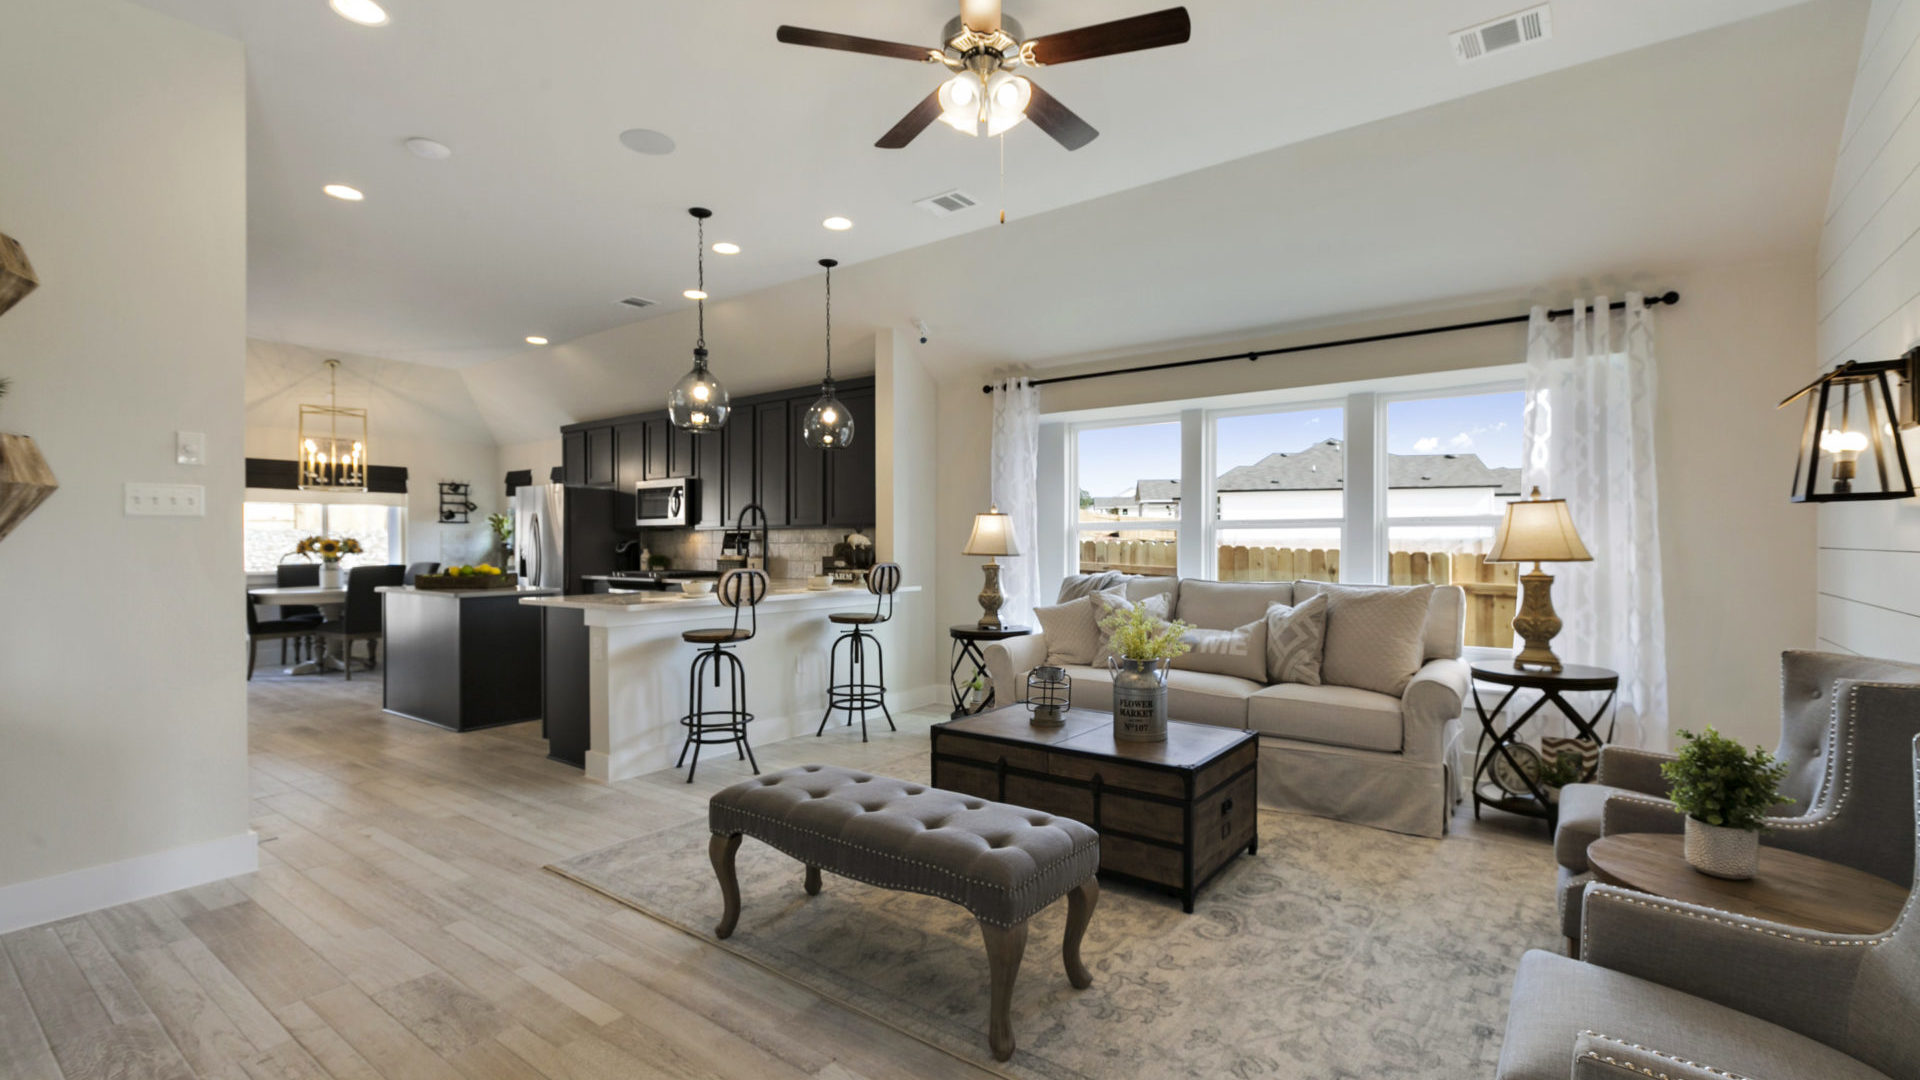 Orchard Ridge Model Home Living Space, Kitchen, and Dining Space